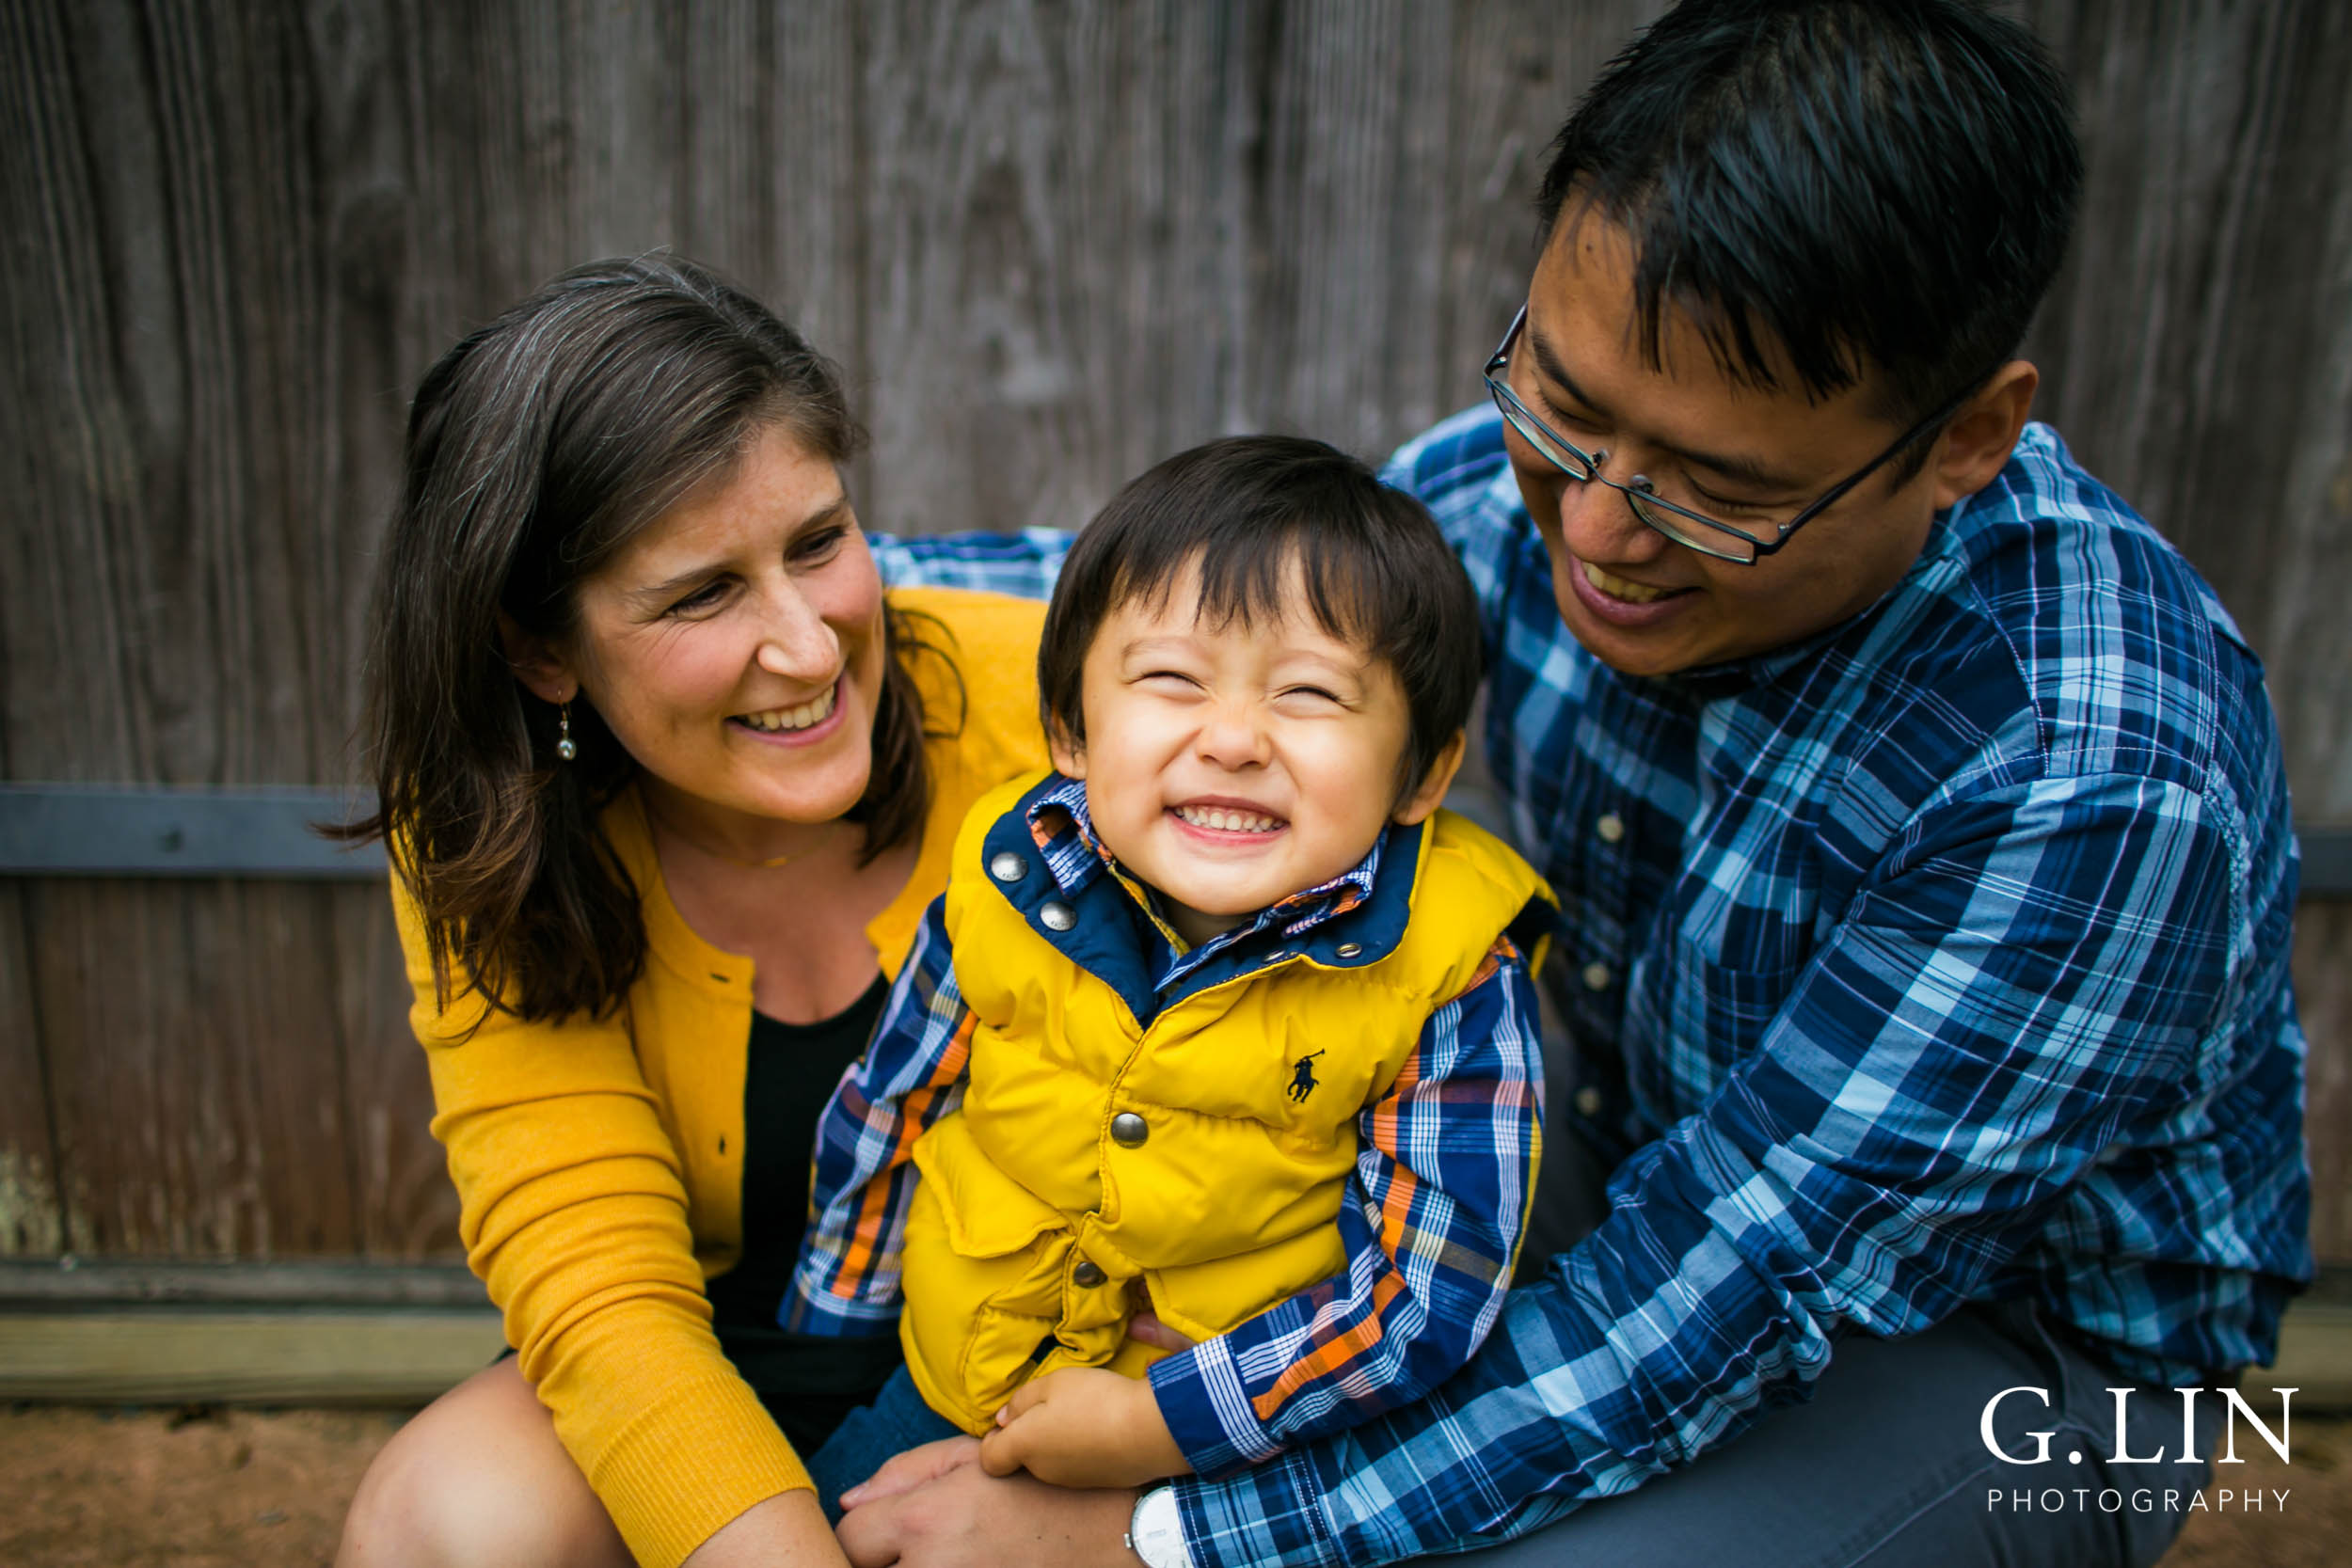 Durham Family Photography | G. Lin Photography | Family of 3 smiling